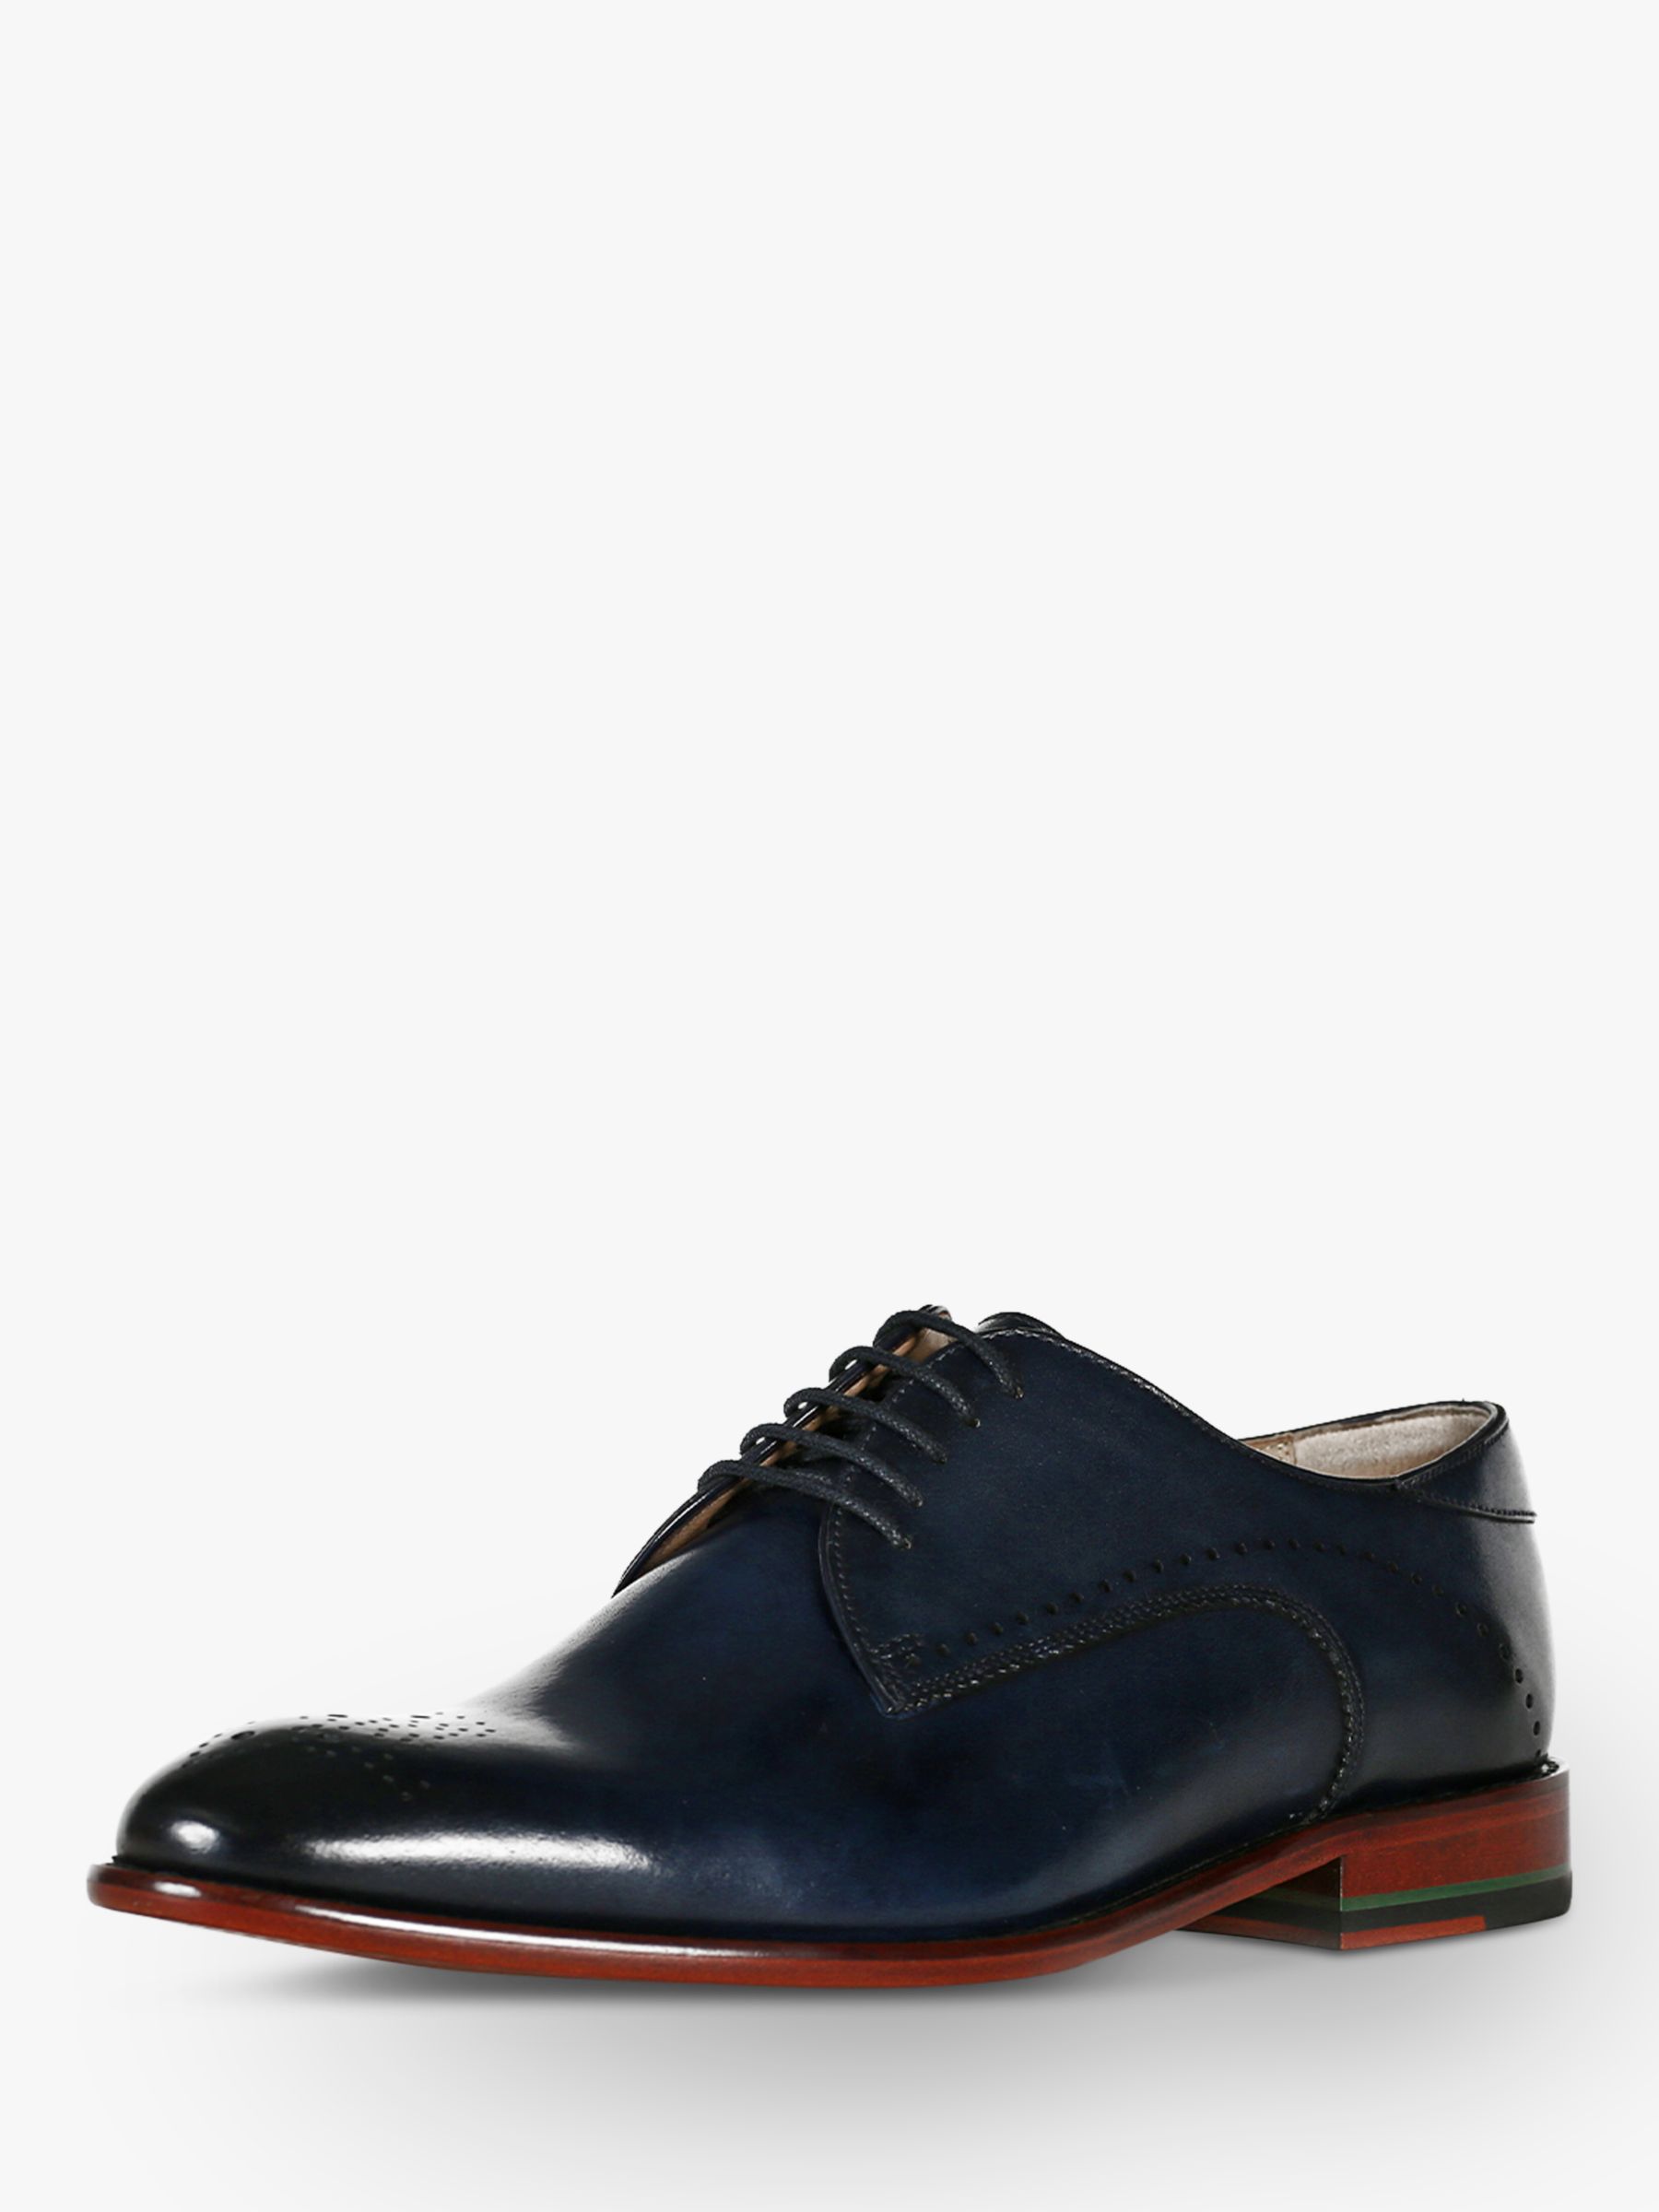 Oliver Sweeney Harworth Leather Brogues